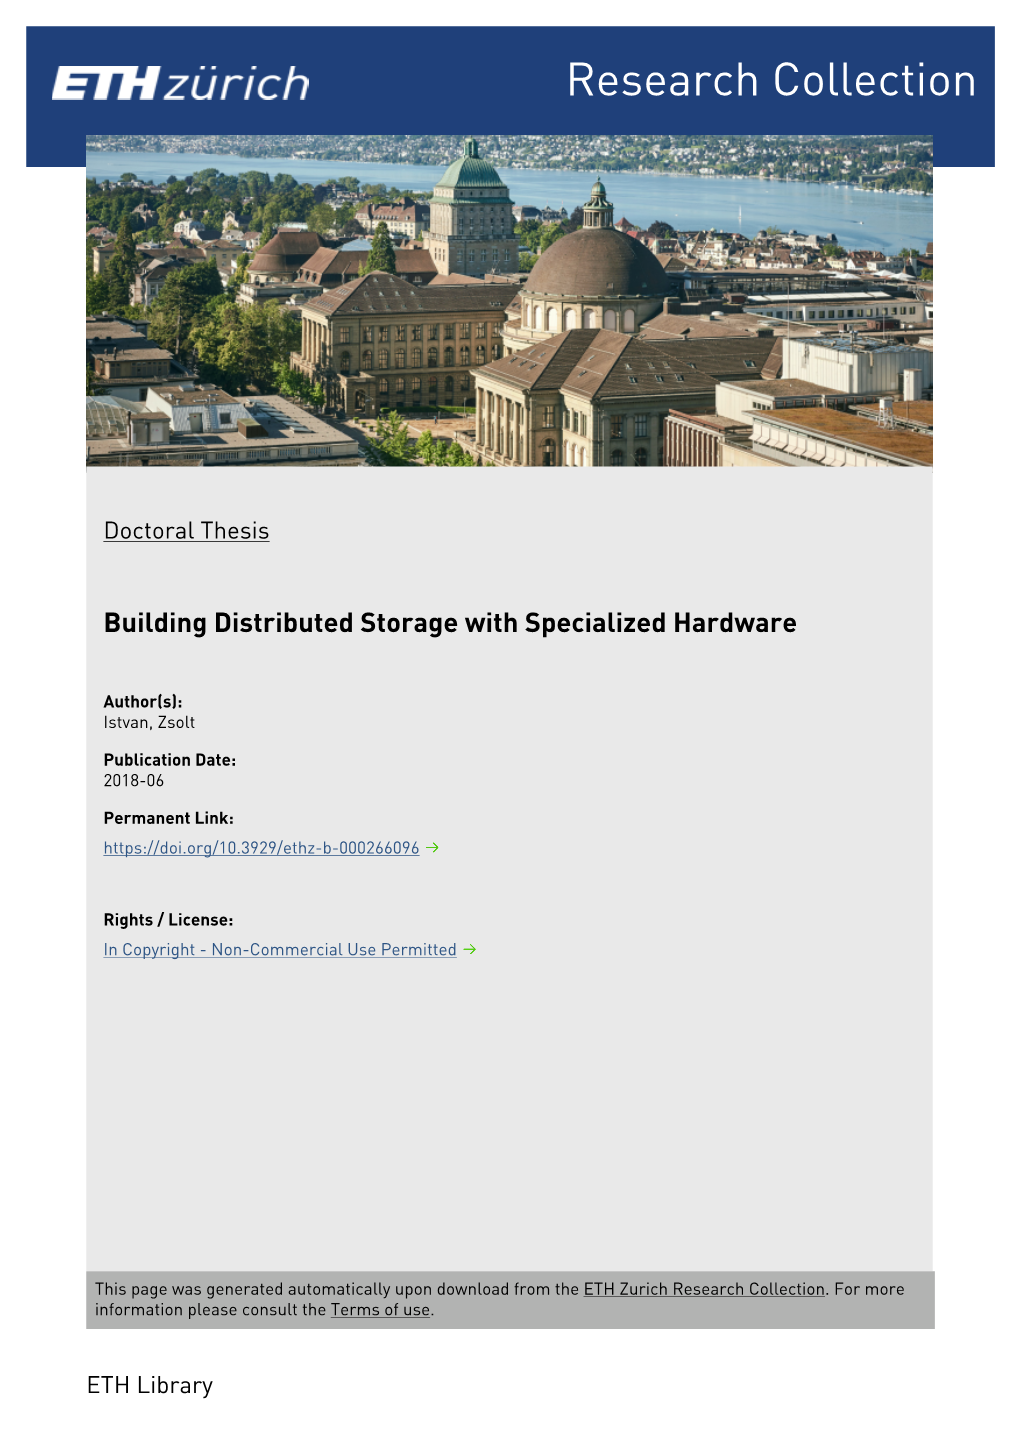 Building Distributed Storage with Specialized Hardware